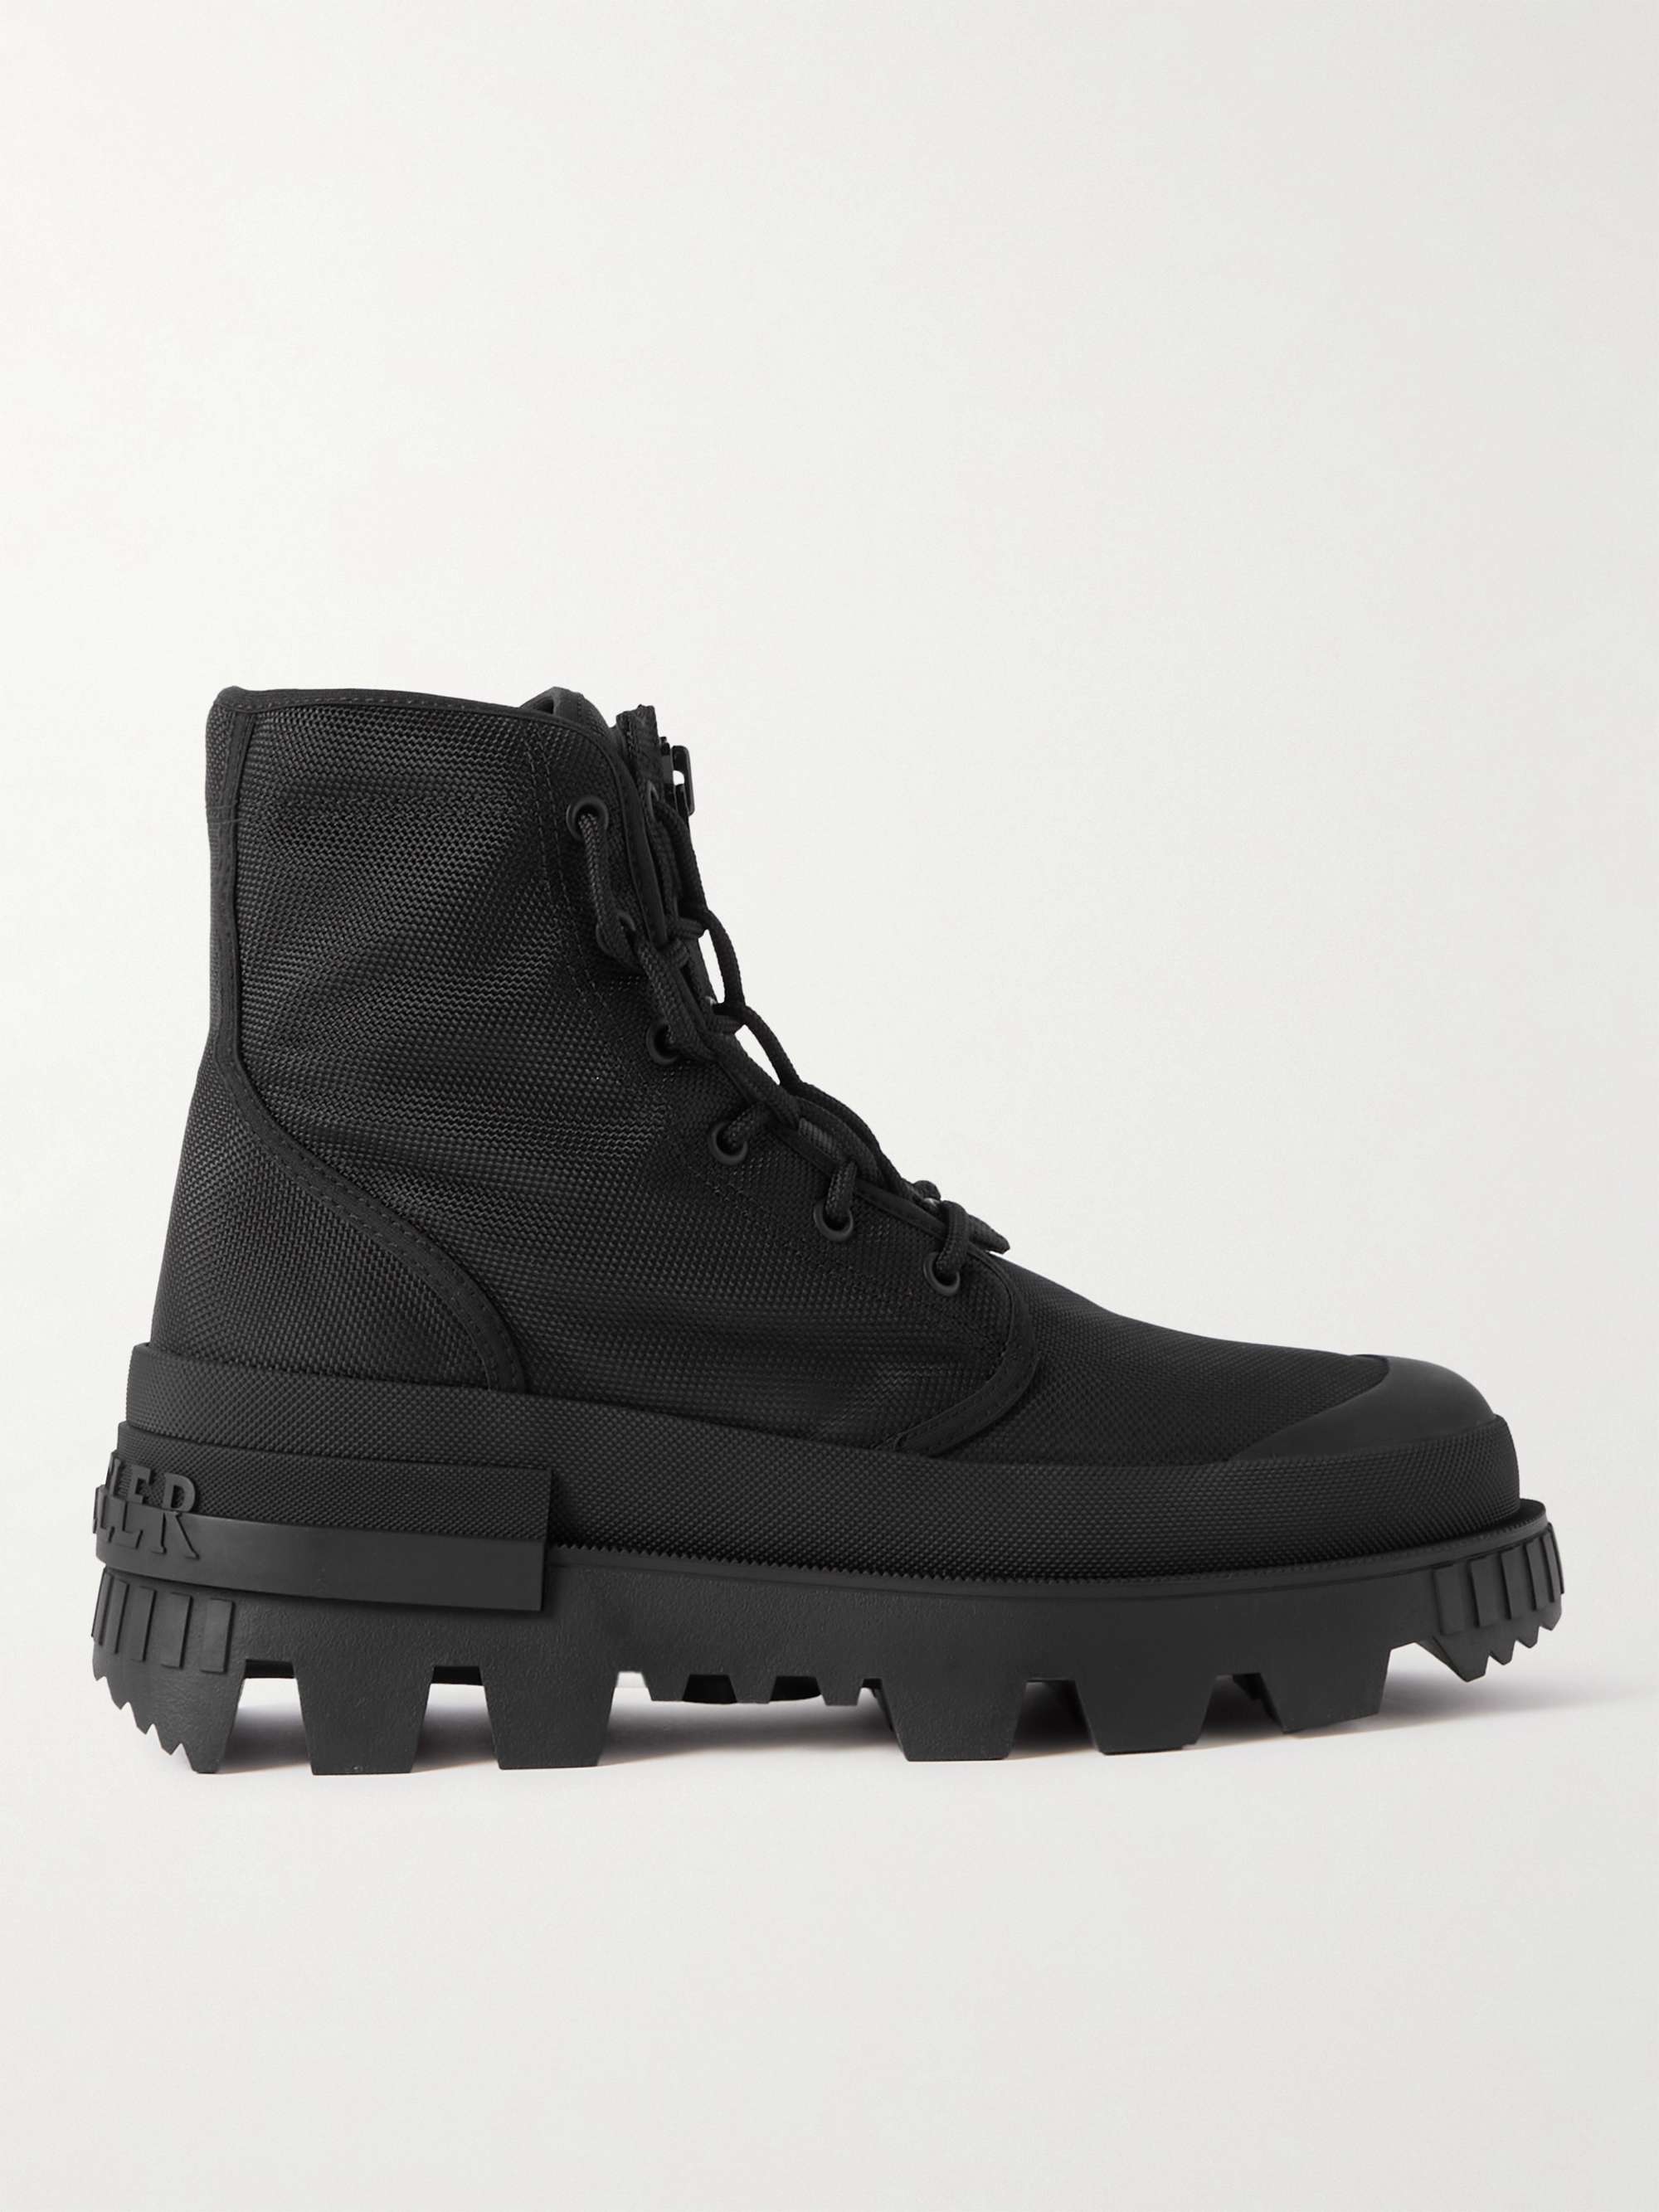 MONCLER GENIUS + Hyke Desertyx Rubber-Trimmed Canvas Ankle Boots